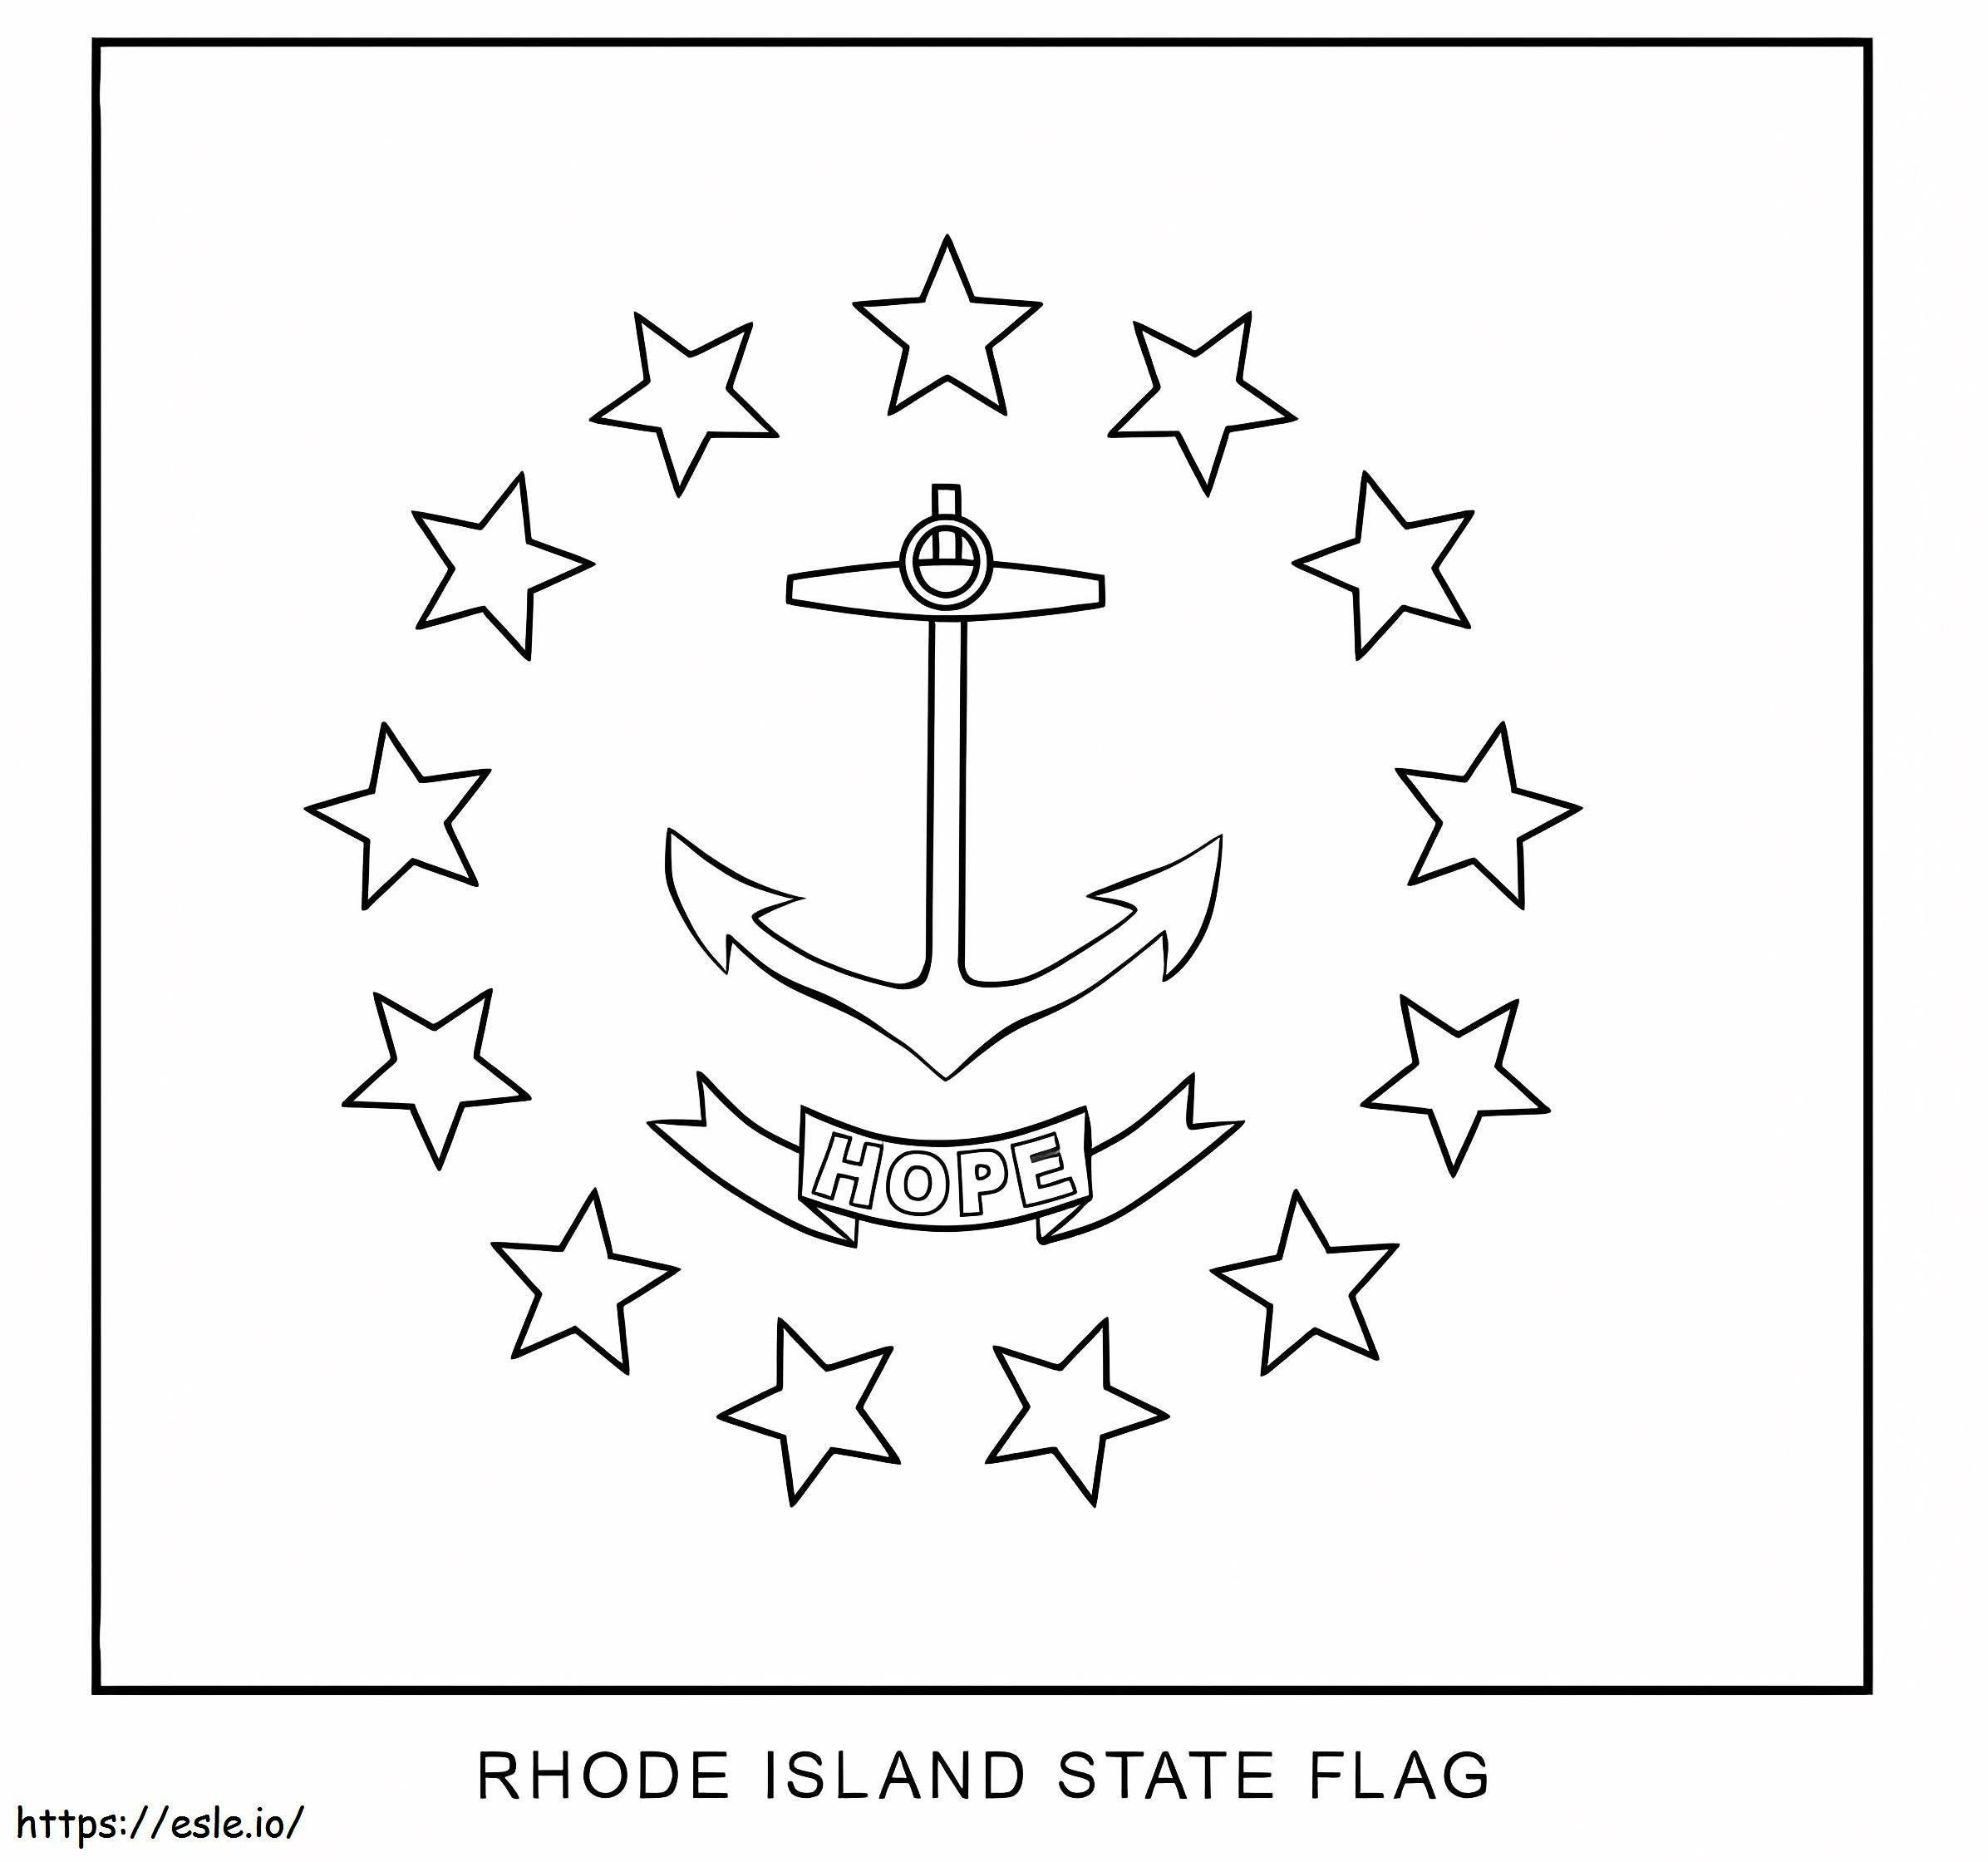 Rhode Island State Flag coloring page